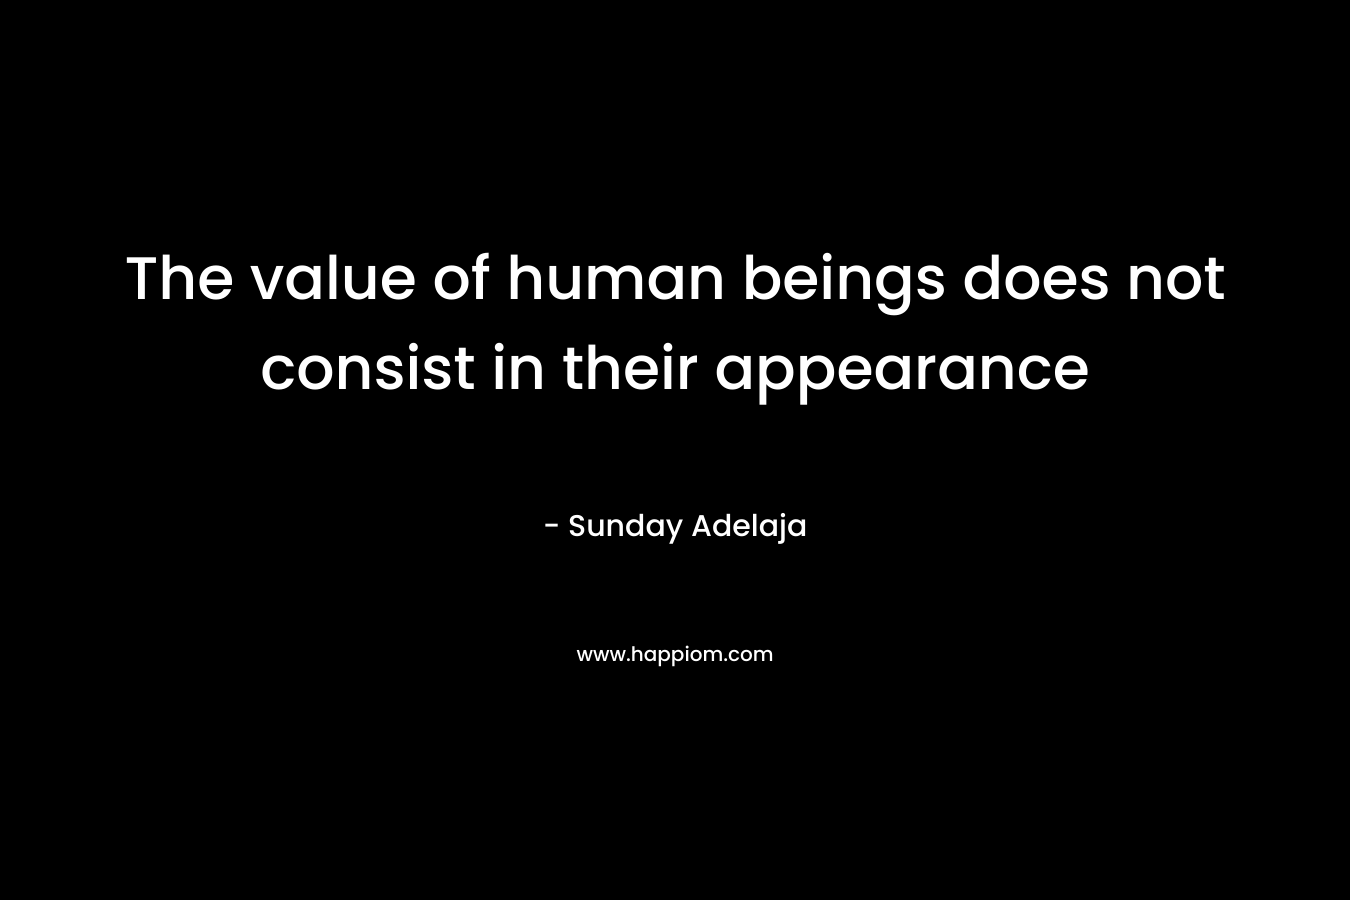 The value of human beings does not consist in their appearance